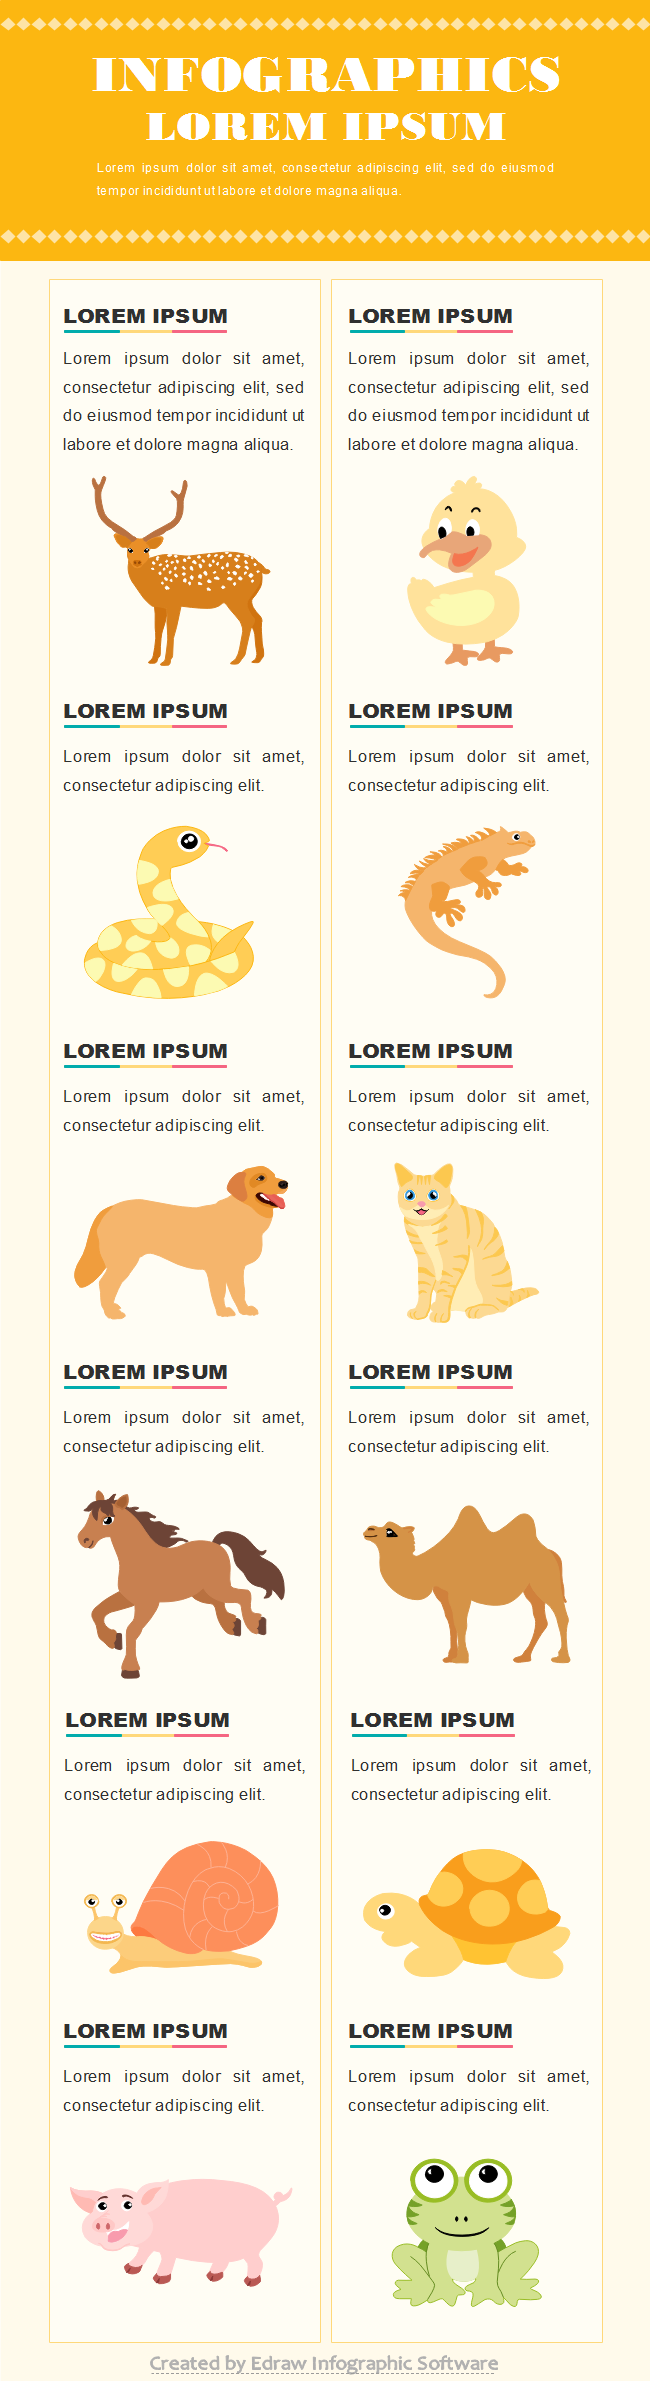 Animal Infographic Template Word Free Download